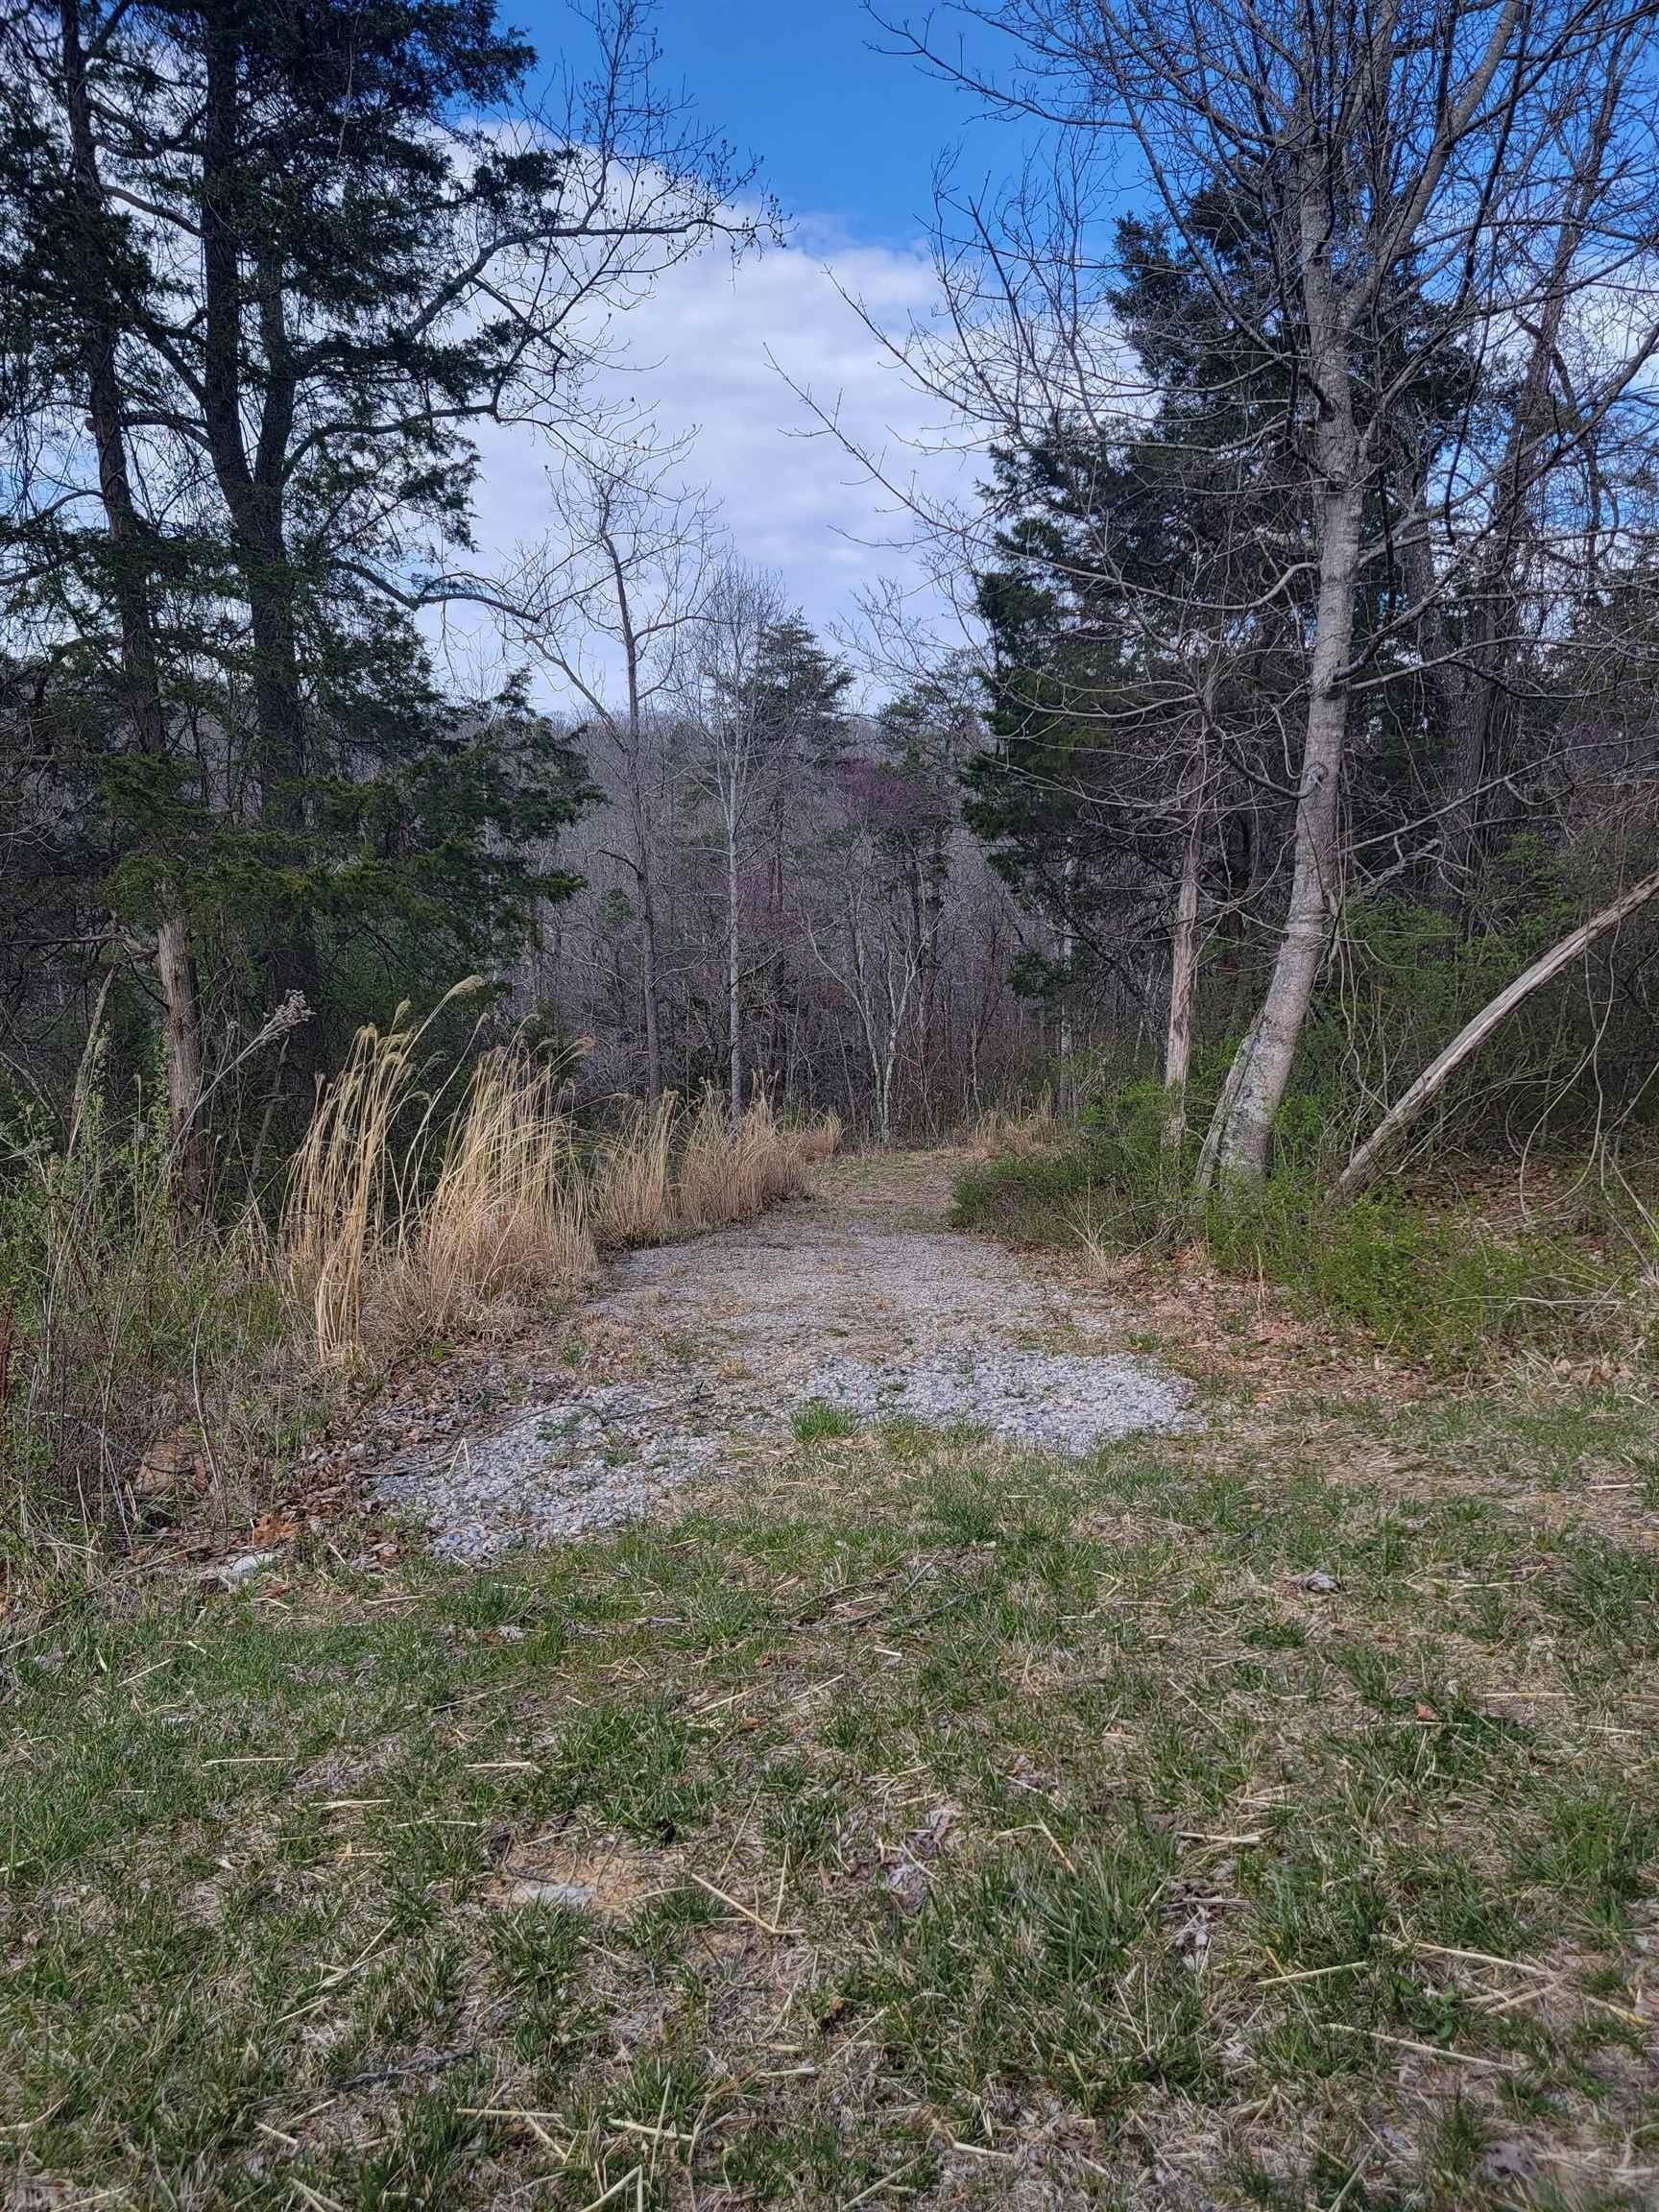 1. Tbd Lot 13 Forest View Lane